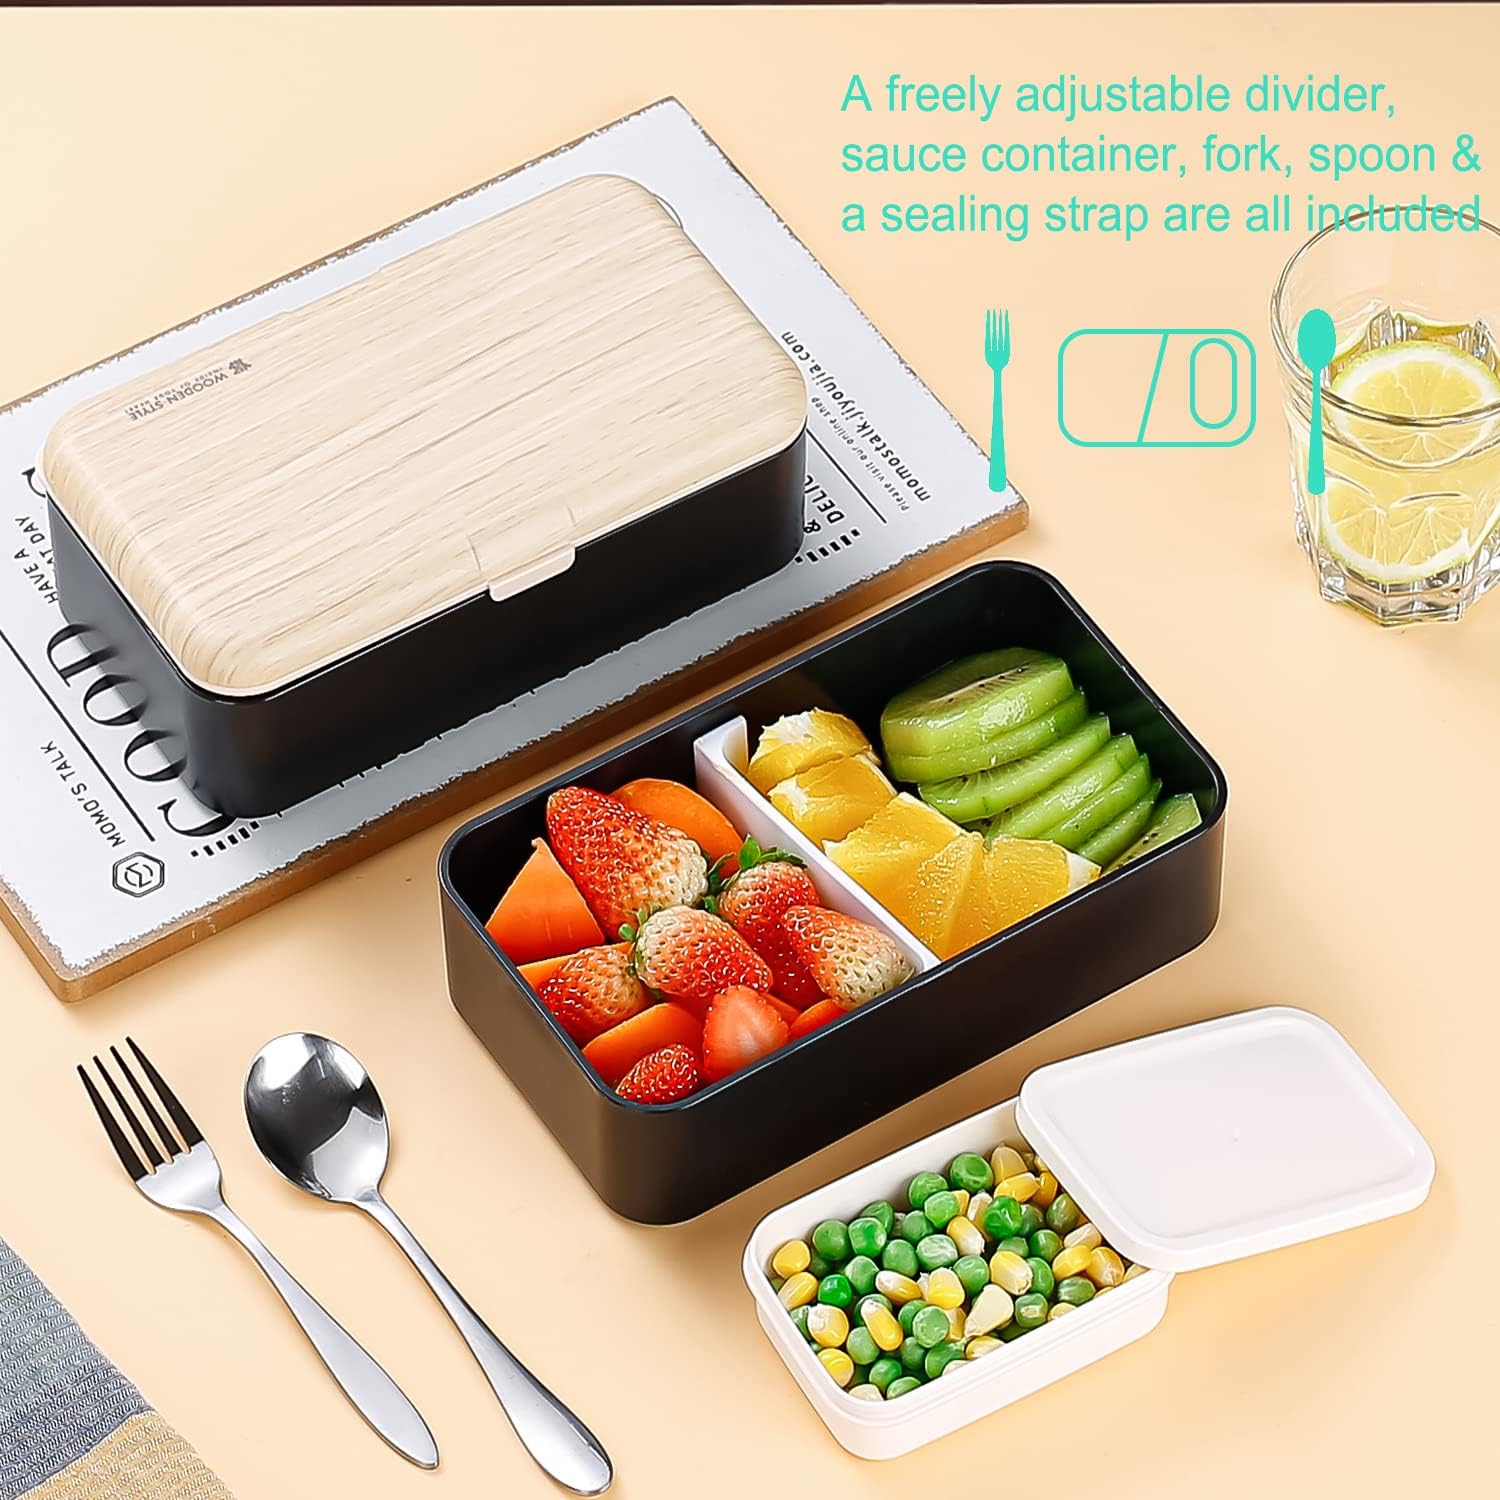 B08L6DF1VY Original Bento Box Lunch Boxes Container Bundle Divider Japanese Style with Stainless Steel